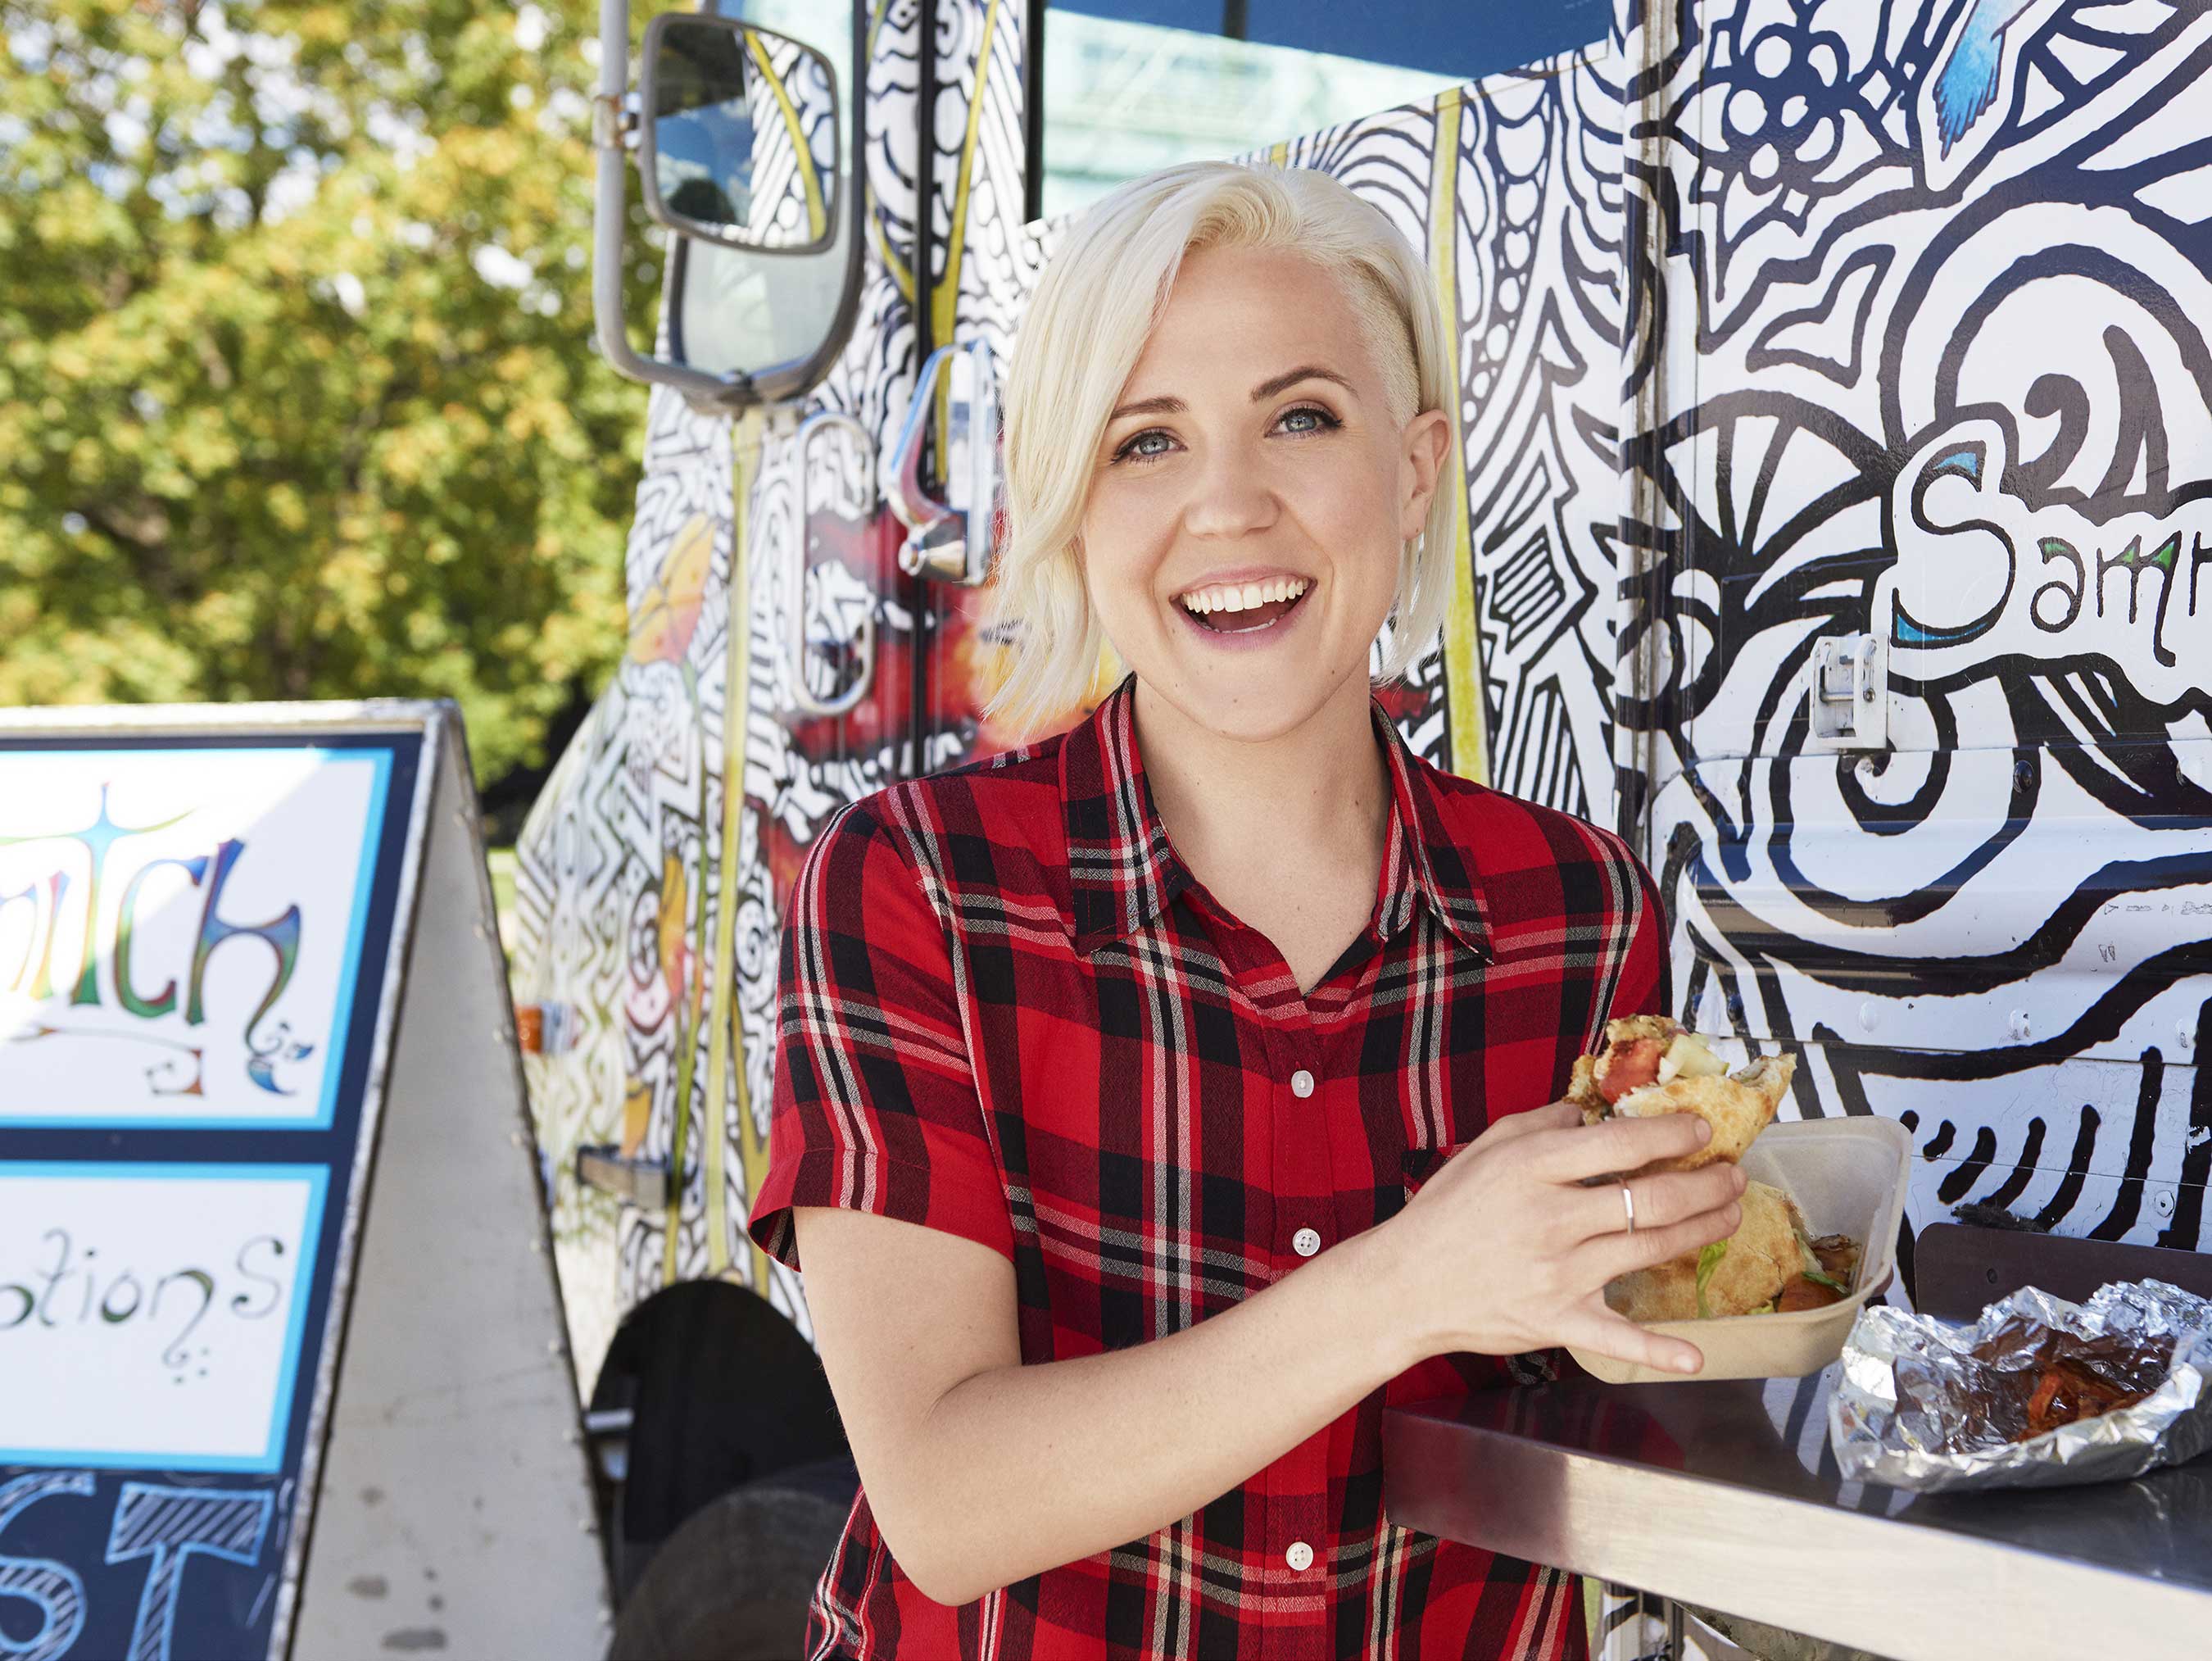 Hannah Hart at Sammitch Truck in Eugene, Oregon, on Food Network's I Hart Food